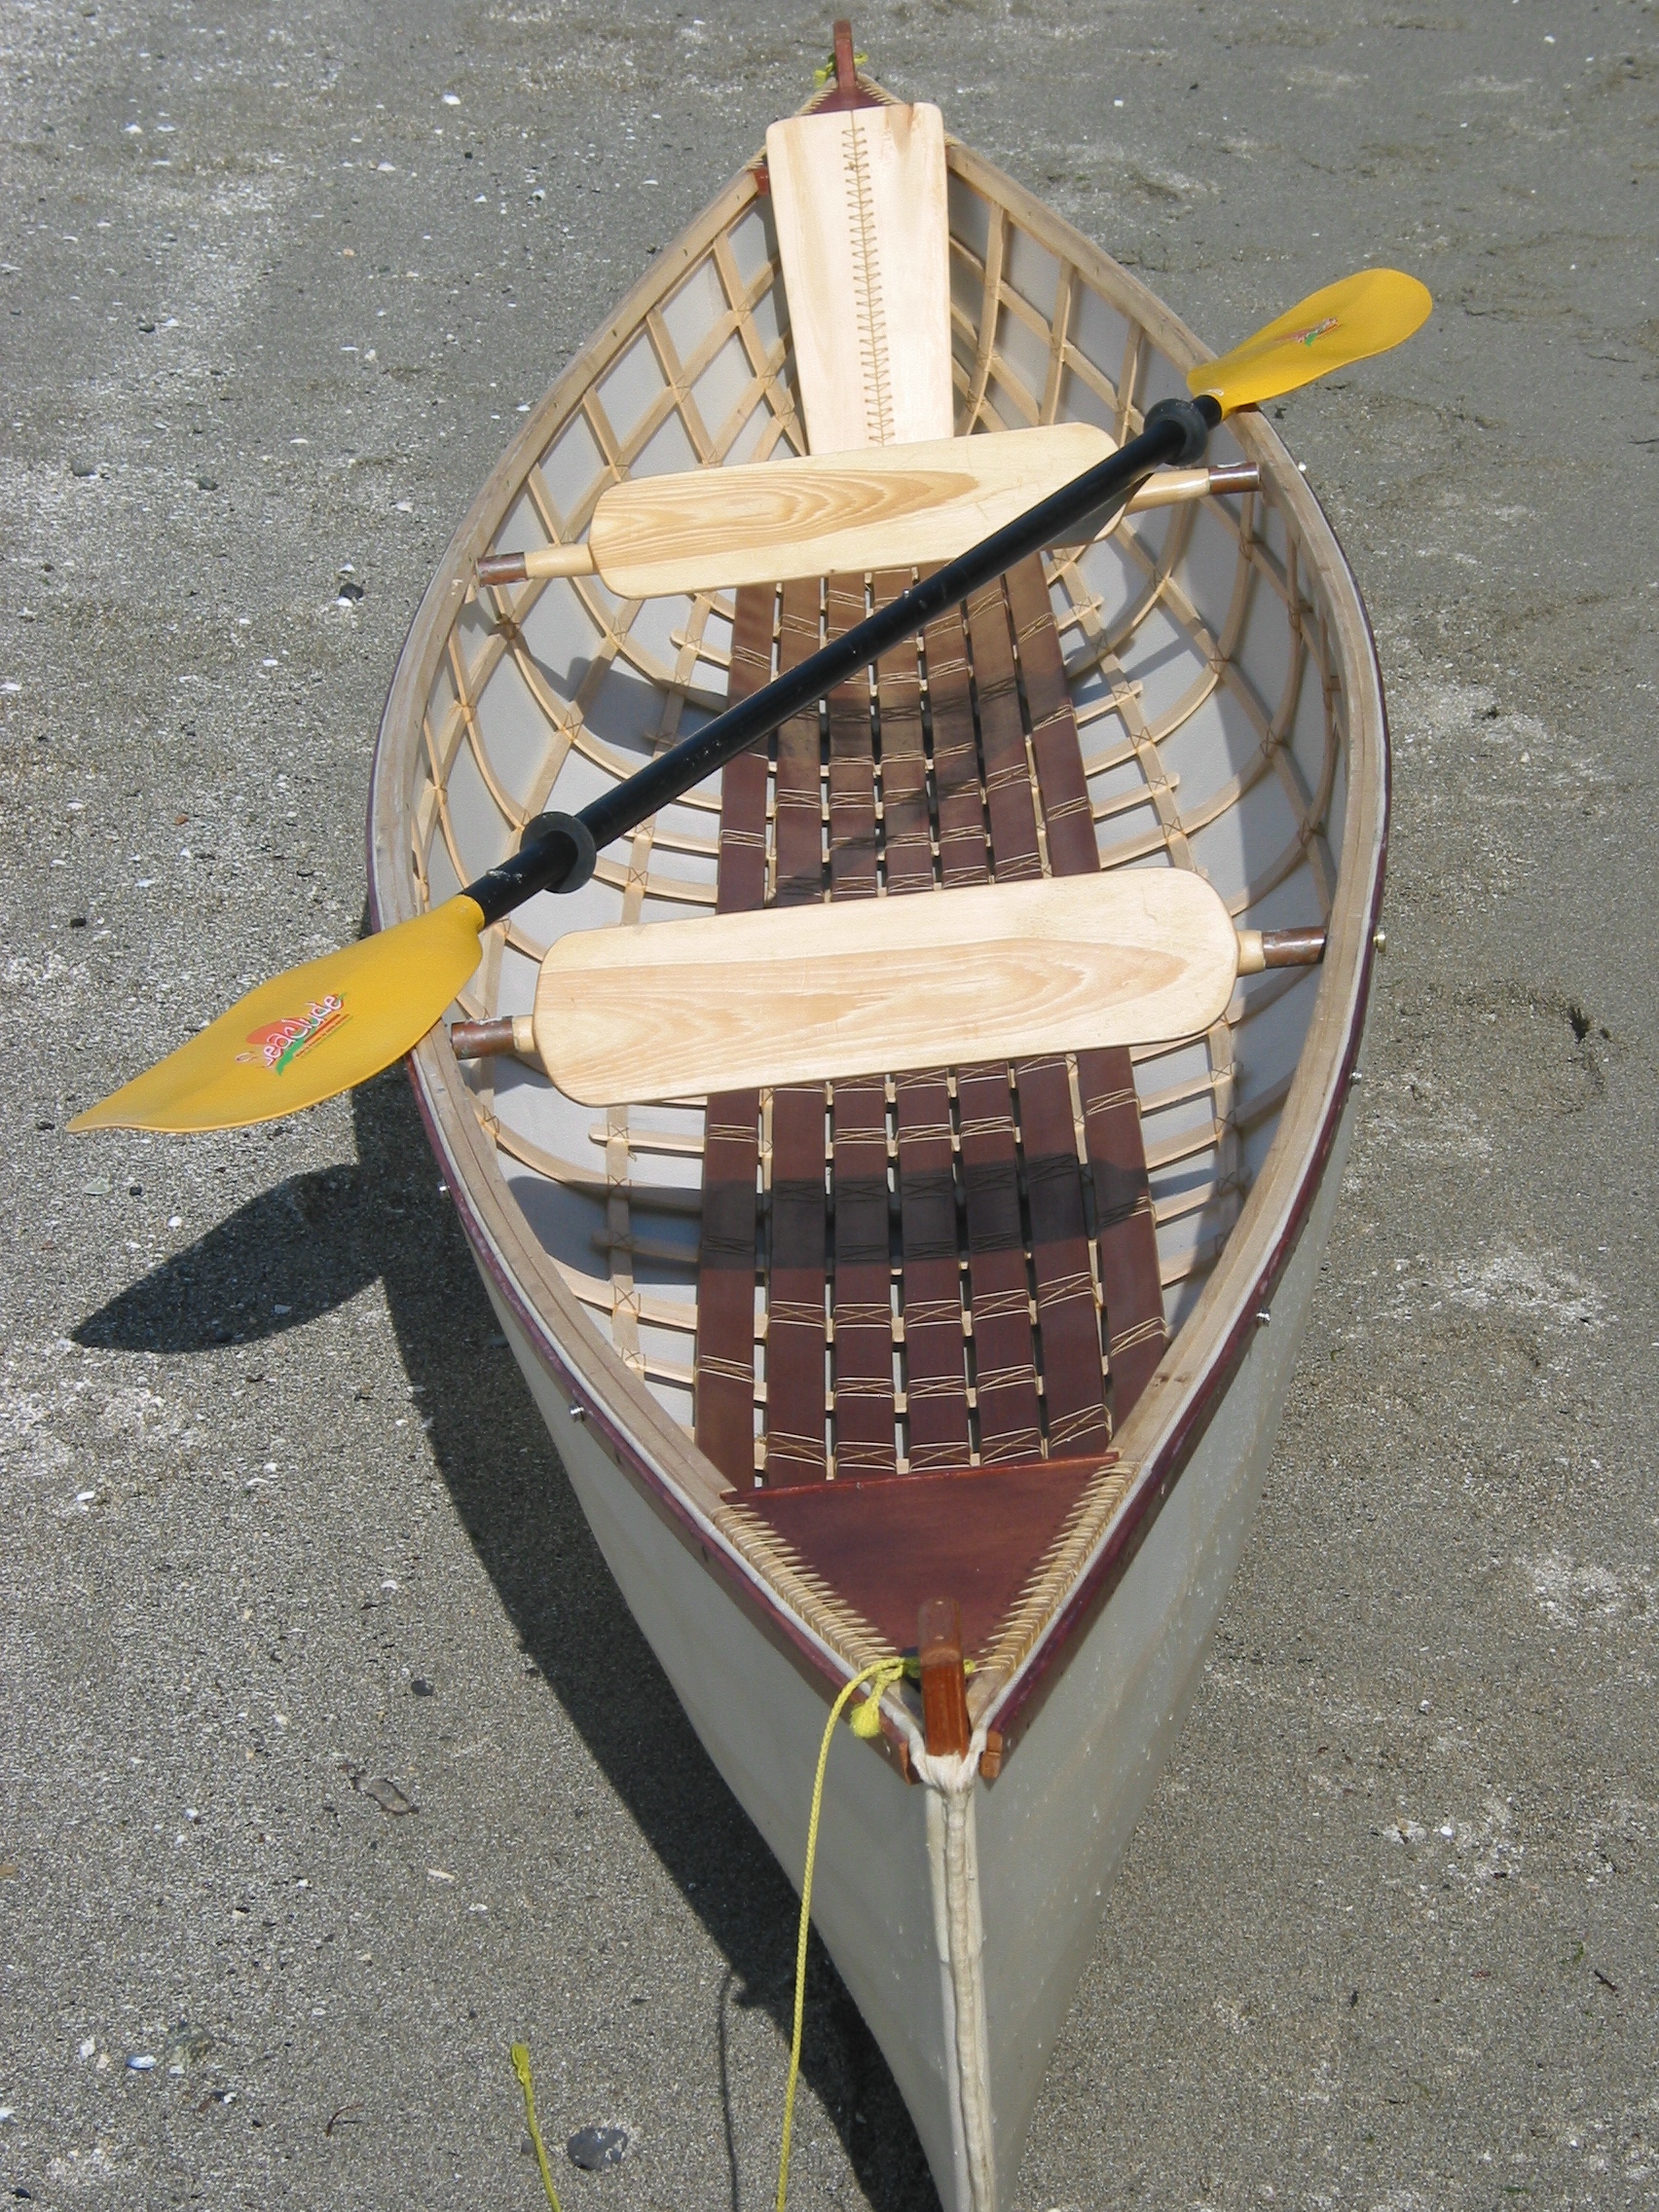 Kit to build a two person canoe / open kayak – includes DVD 